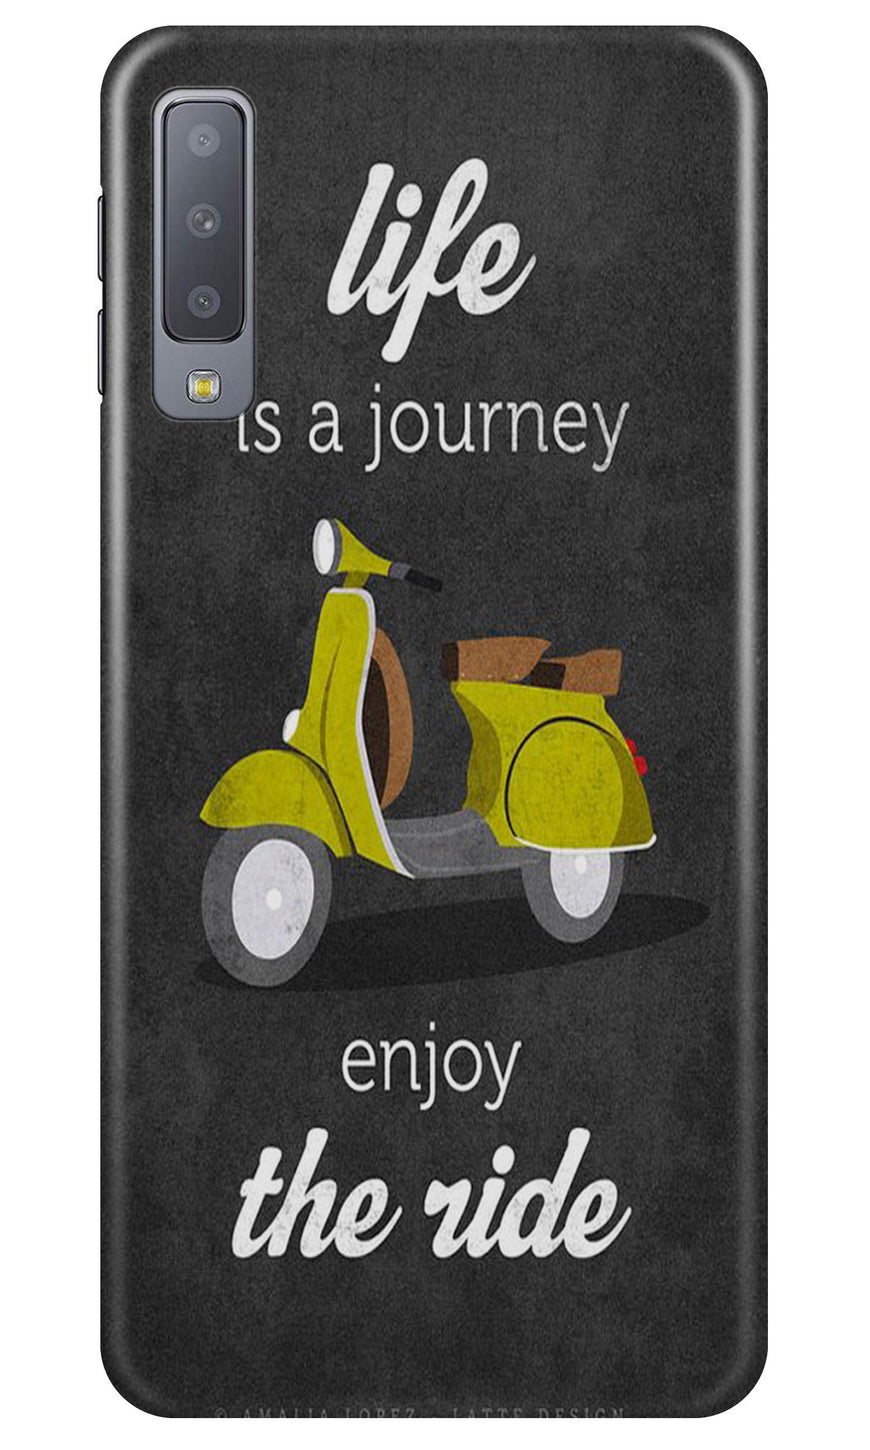 Life is a Journey Case for Samsung Galaxy A70 (Design No. 261)